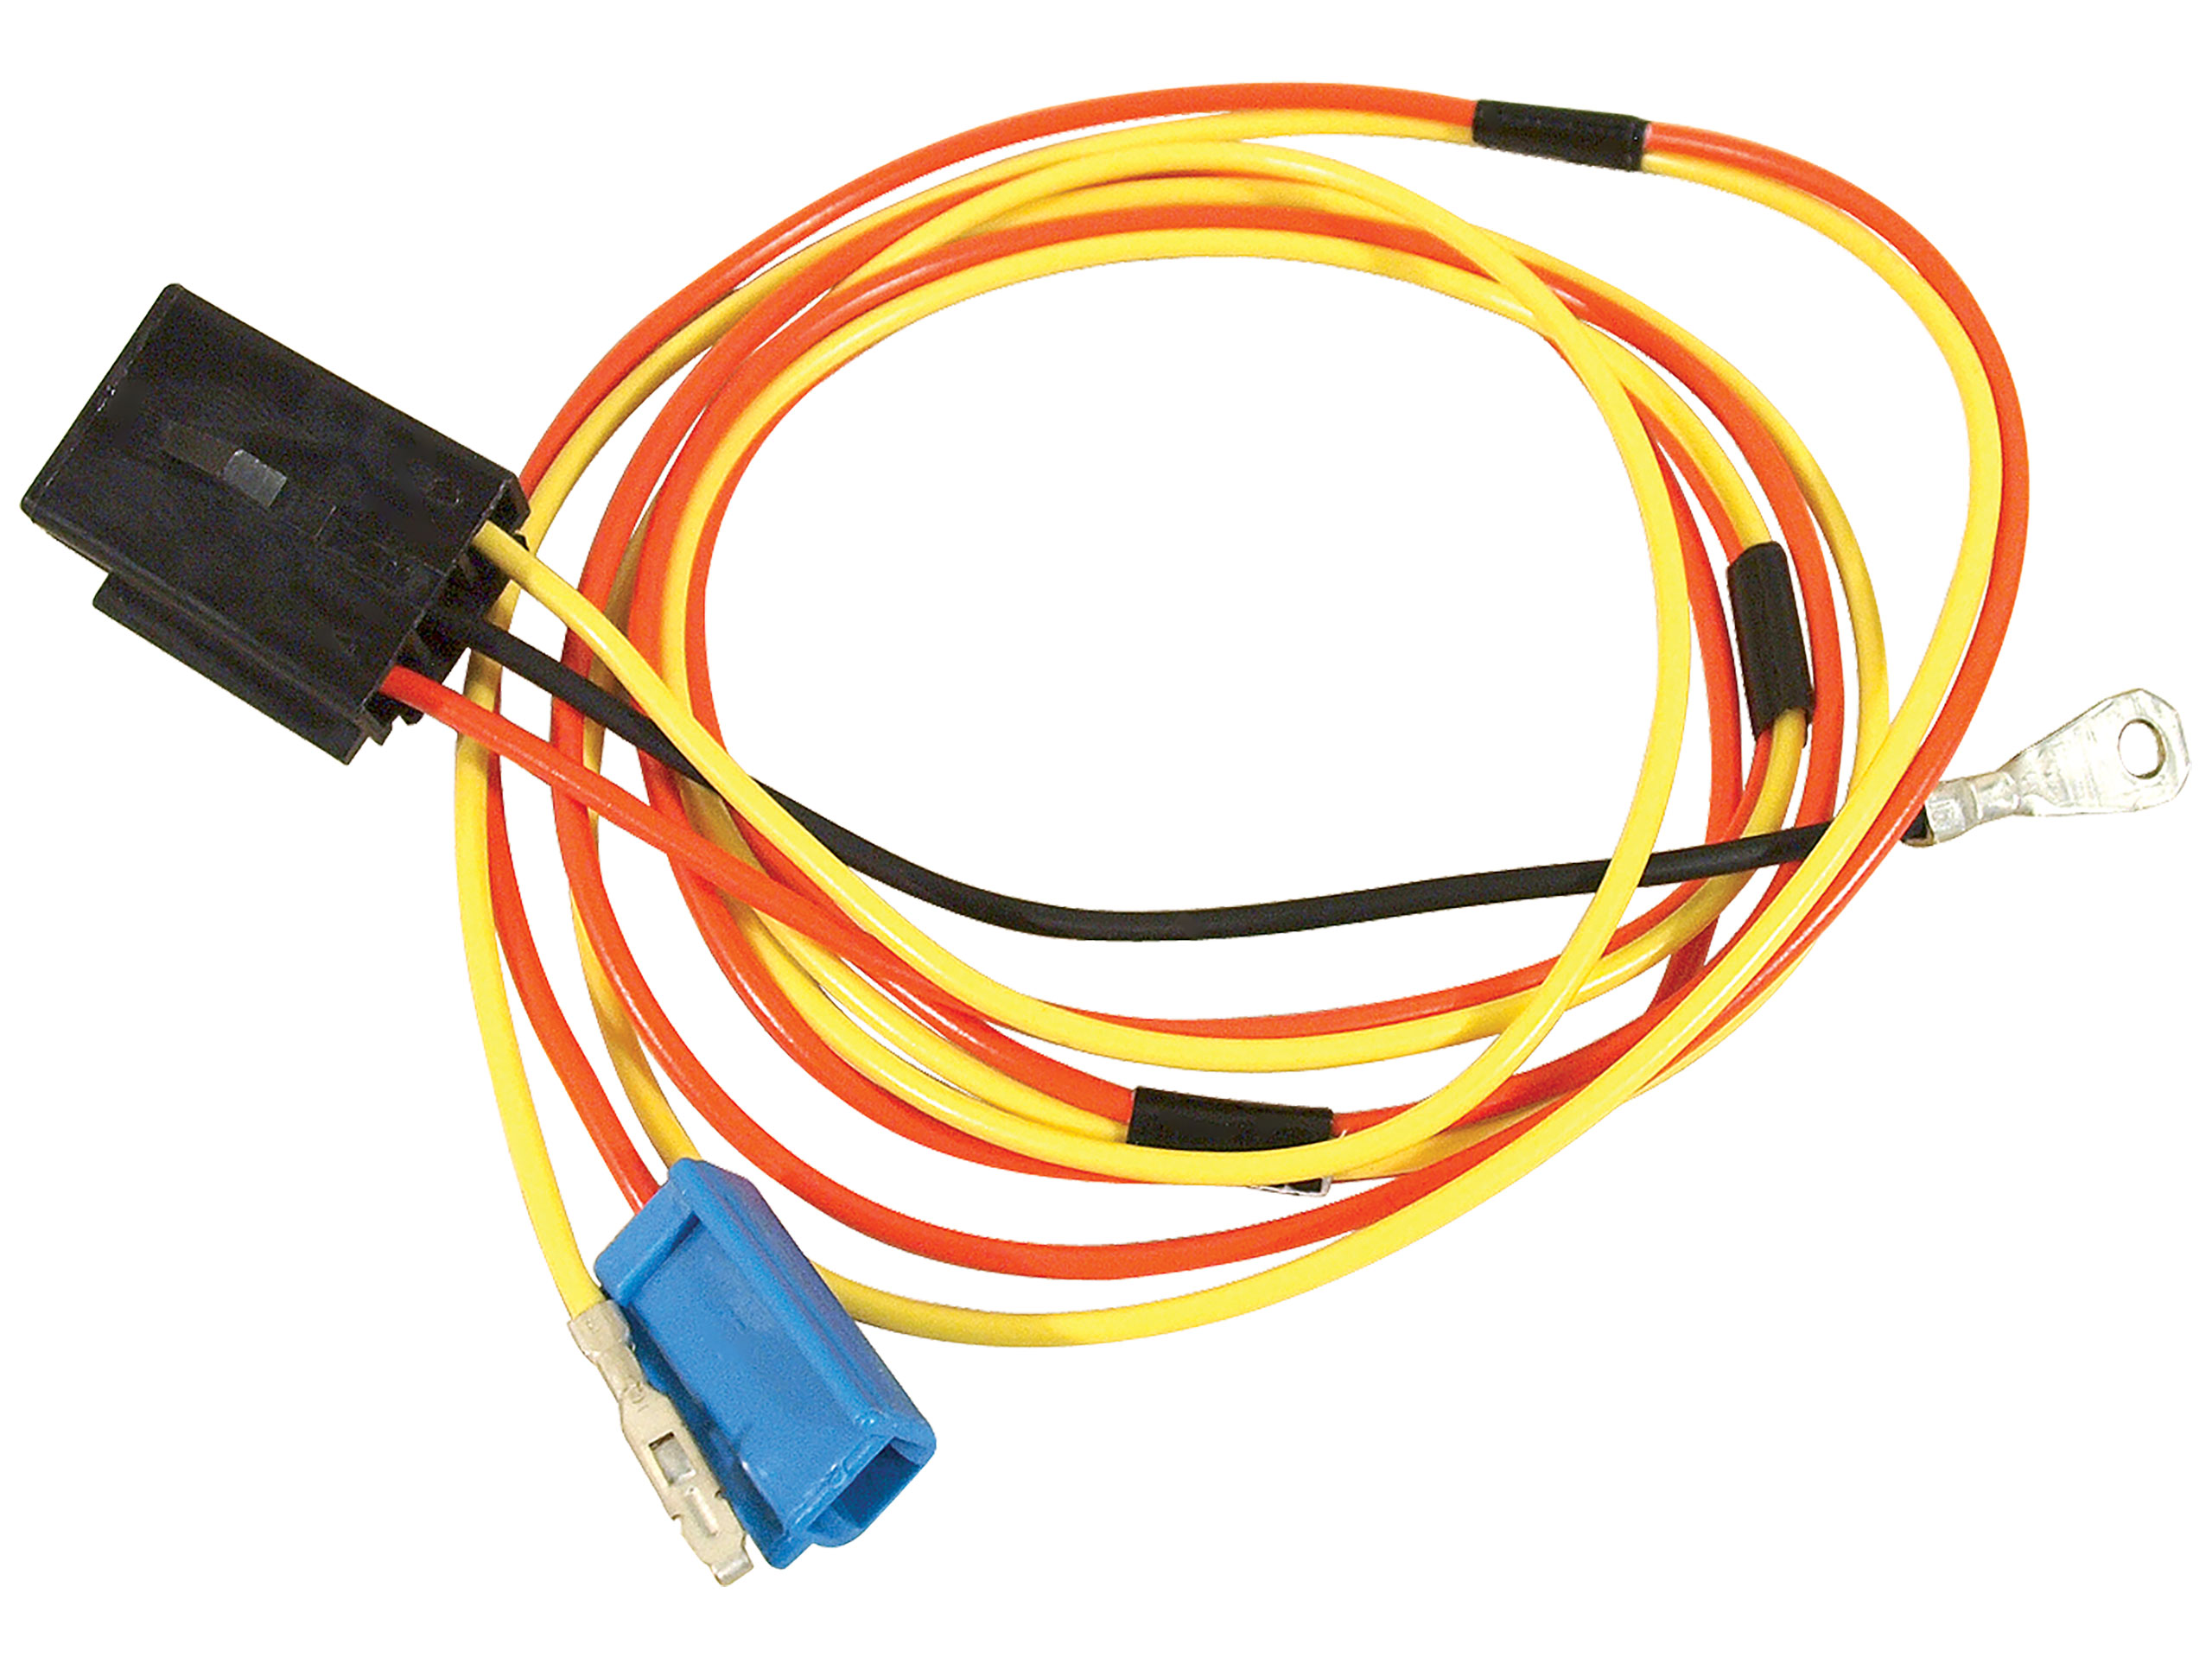 C3 1979 Chevrolet Corvette Harness. Power Antenna Radio To Relay - Lectric Limited, Inc.